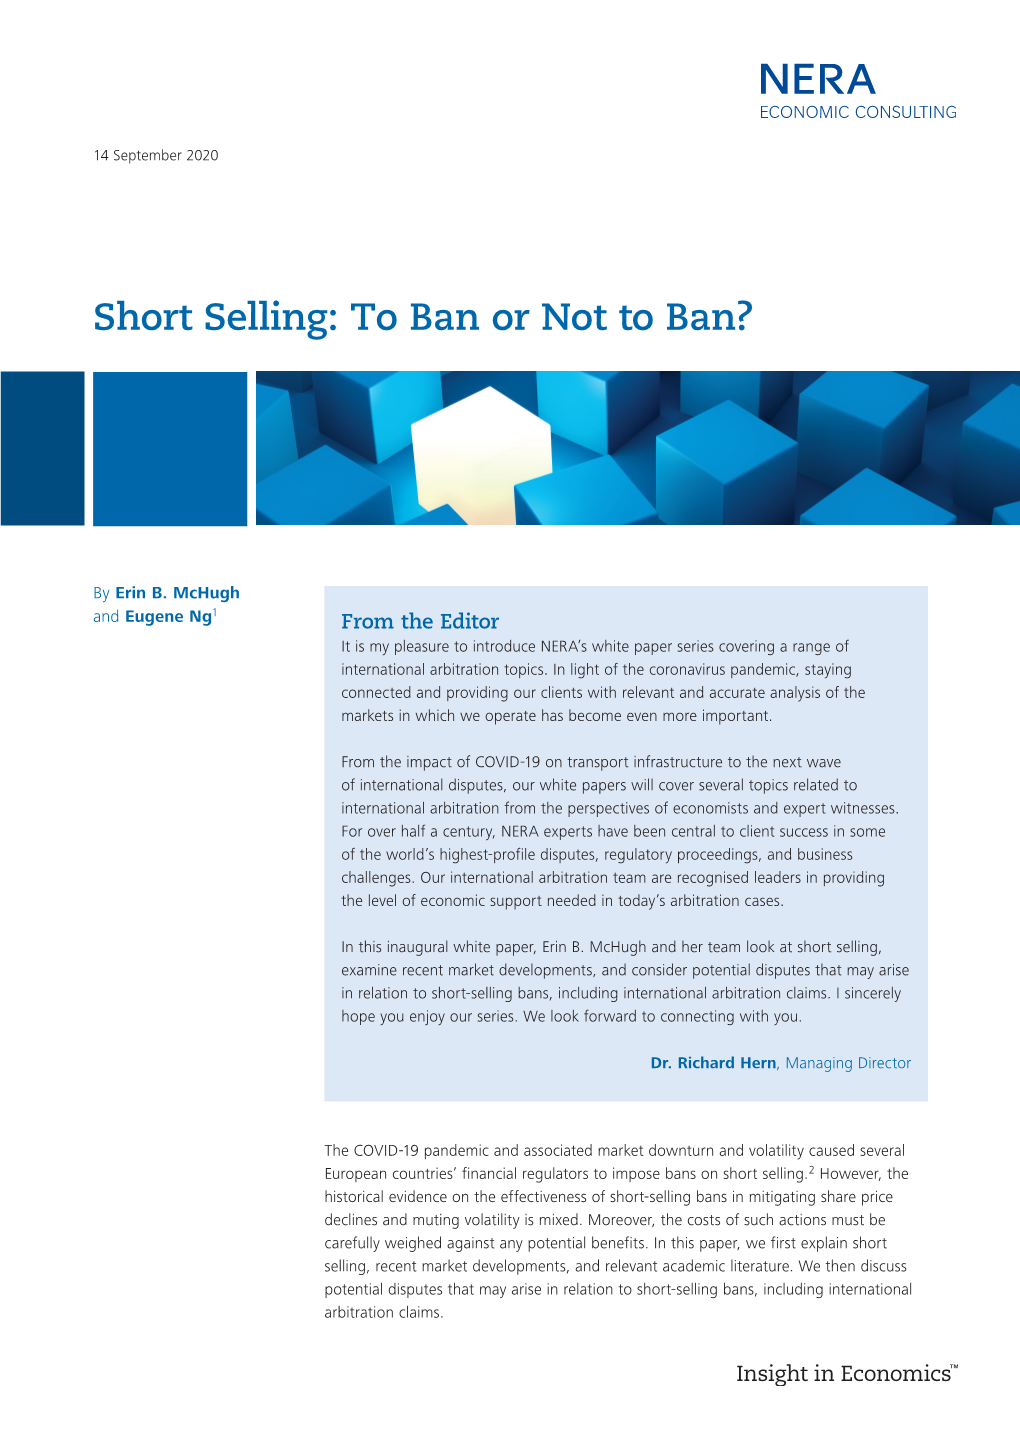 Short Selling: to Ban Or Not to Ban?